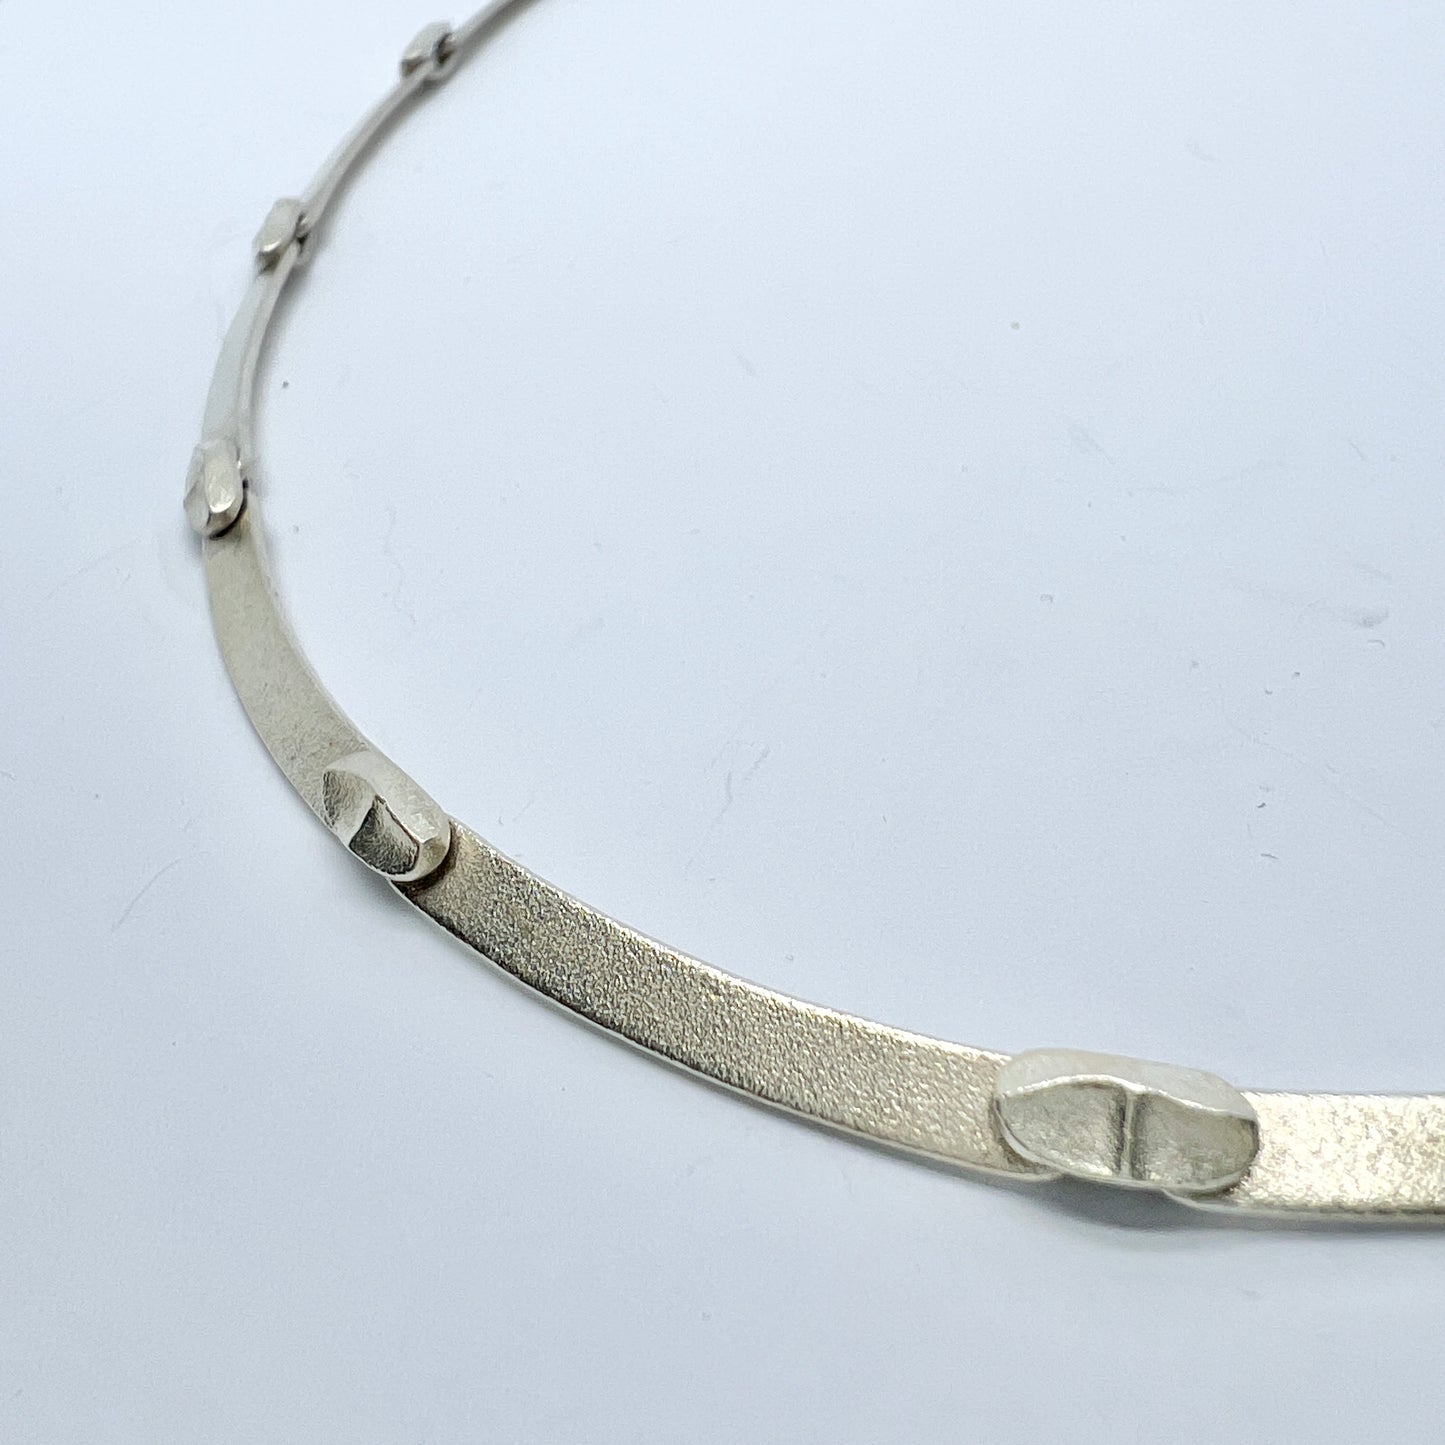 Bjorn Weckstrom for Lapponia, Finland 1979. Vintage Sterling Silver necklace. Design: Labyrinth.